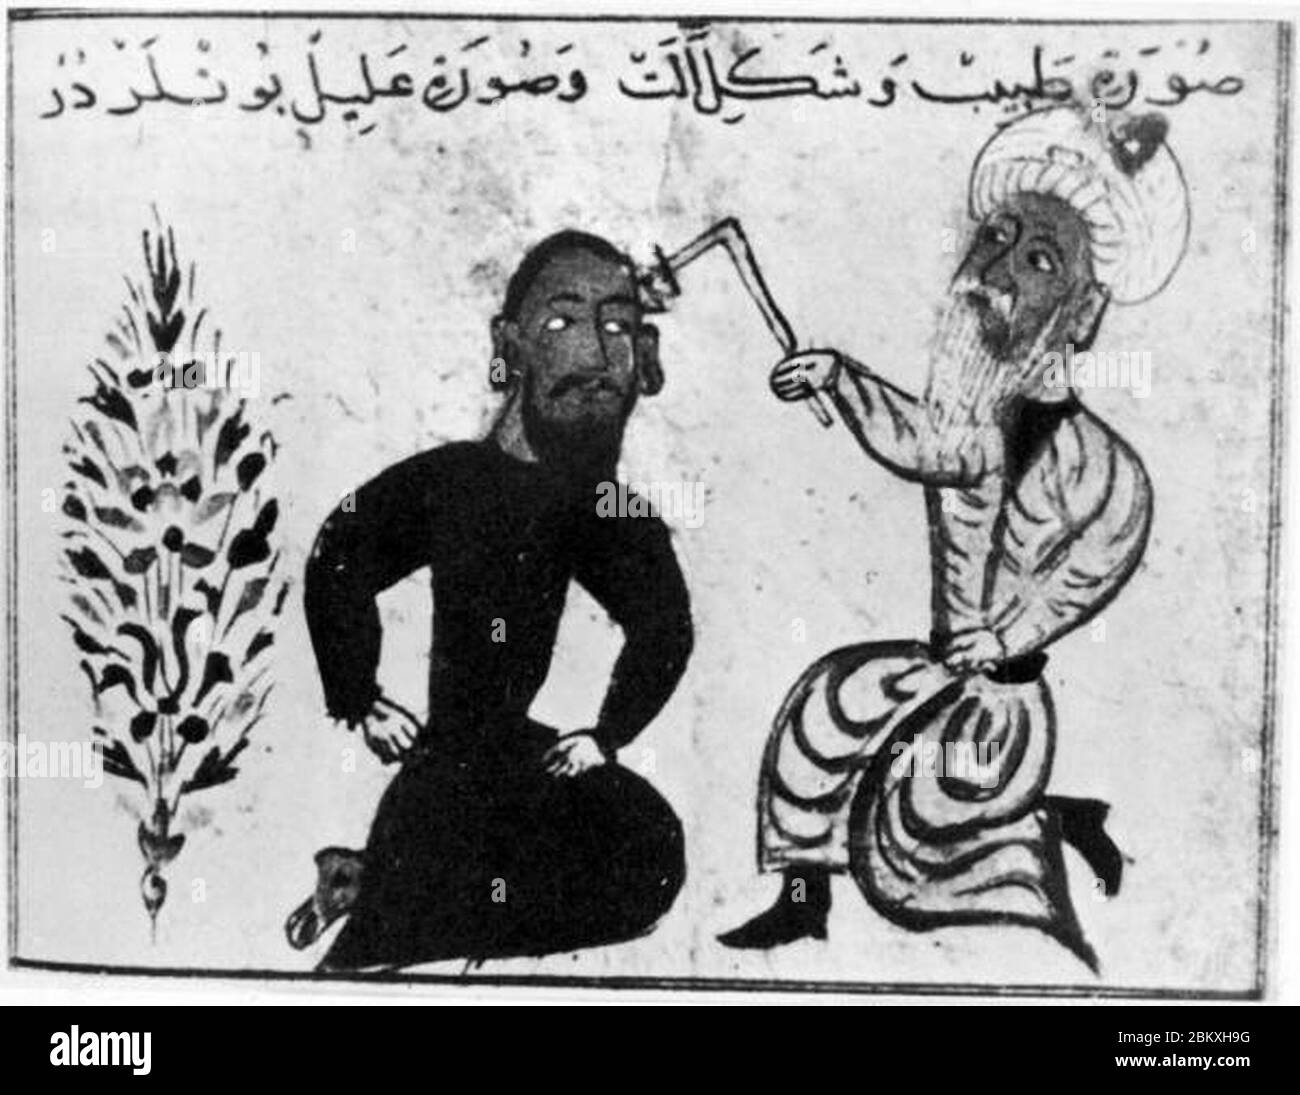 Illustration of medieval Arab doctor treating a patient by cauterizing a wound. Stock Photo